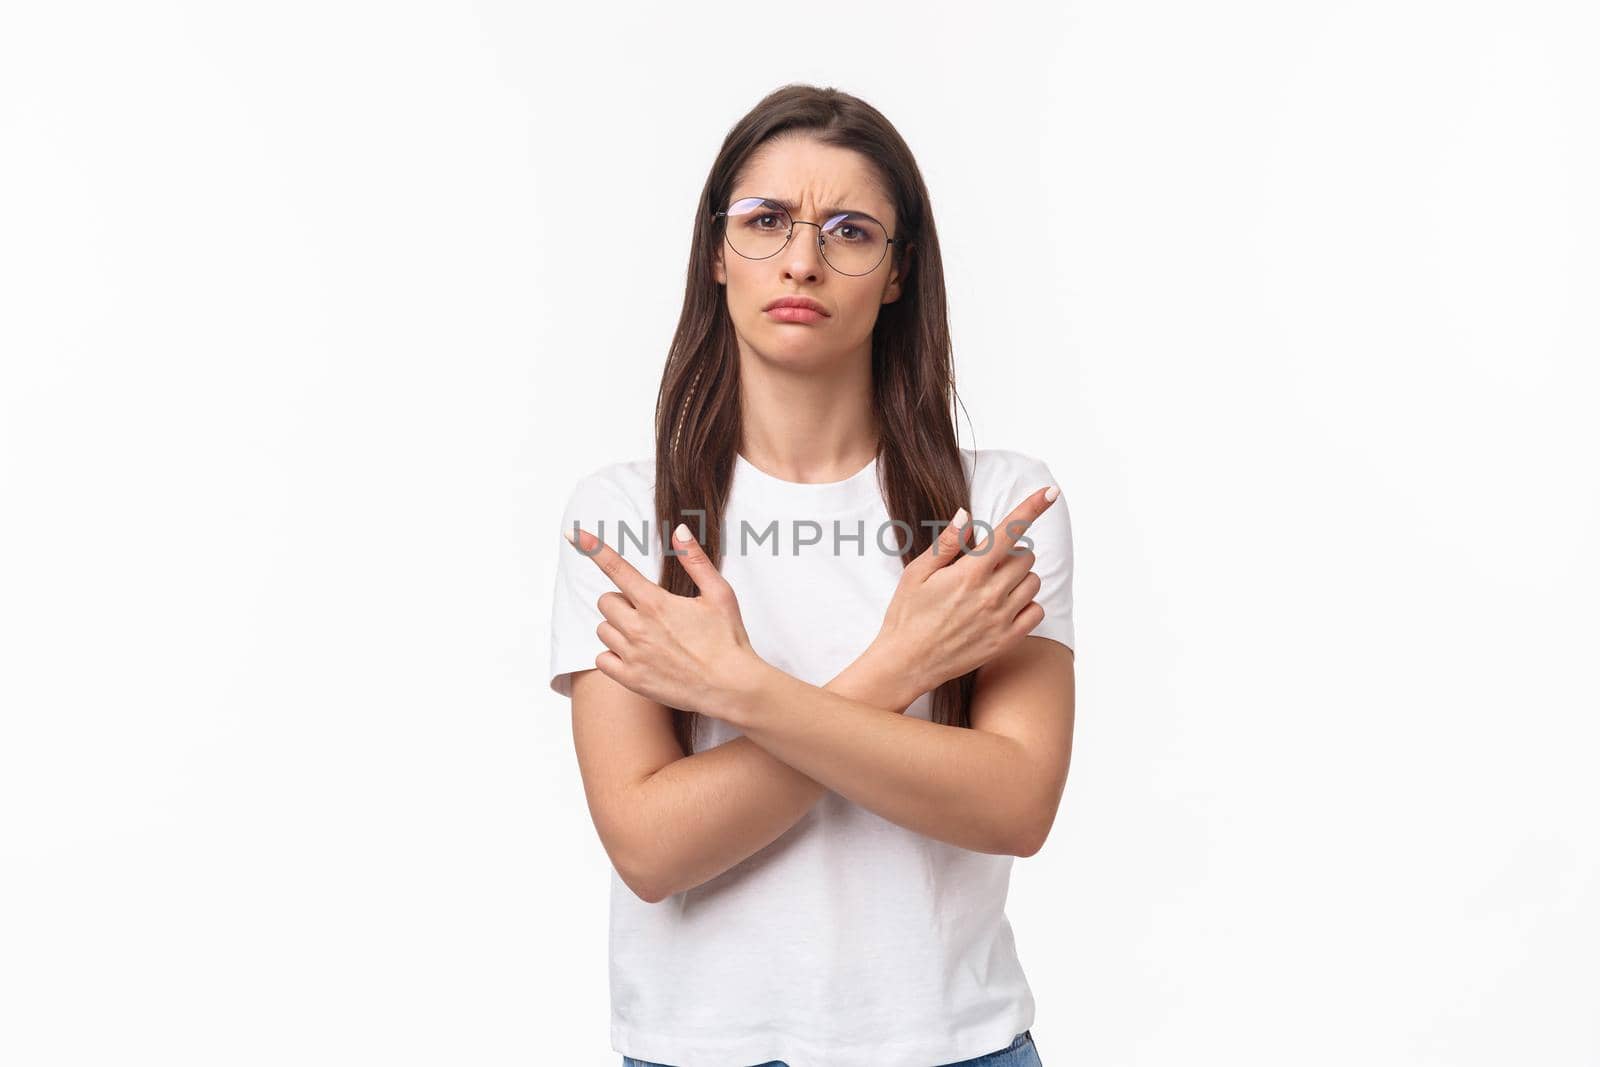 Waist-up portrait of indecisive, puzzled and confused good-looking young woman in glasses, t-shirt, cross hands pointing finger left and right at two variants, frowning, cant decide, white background.